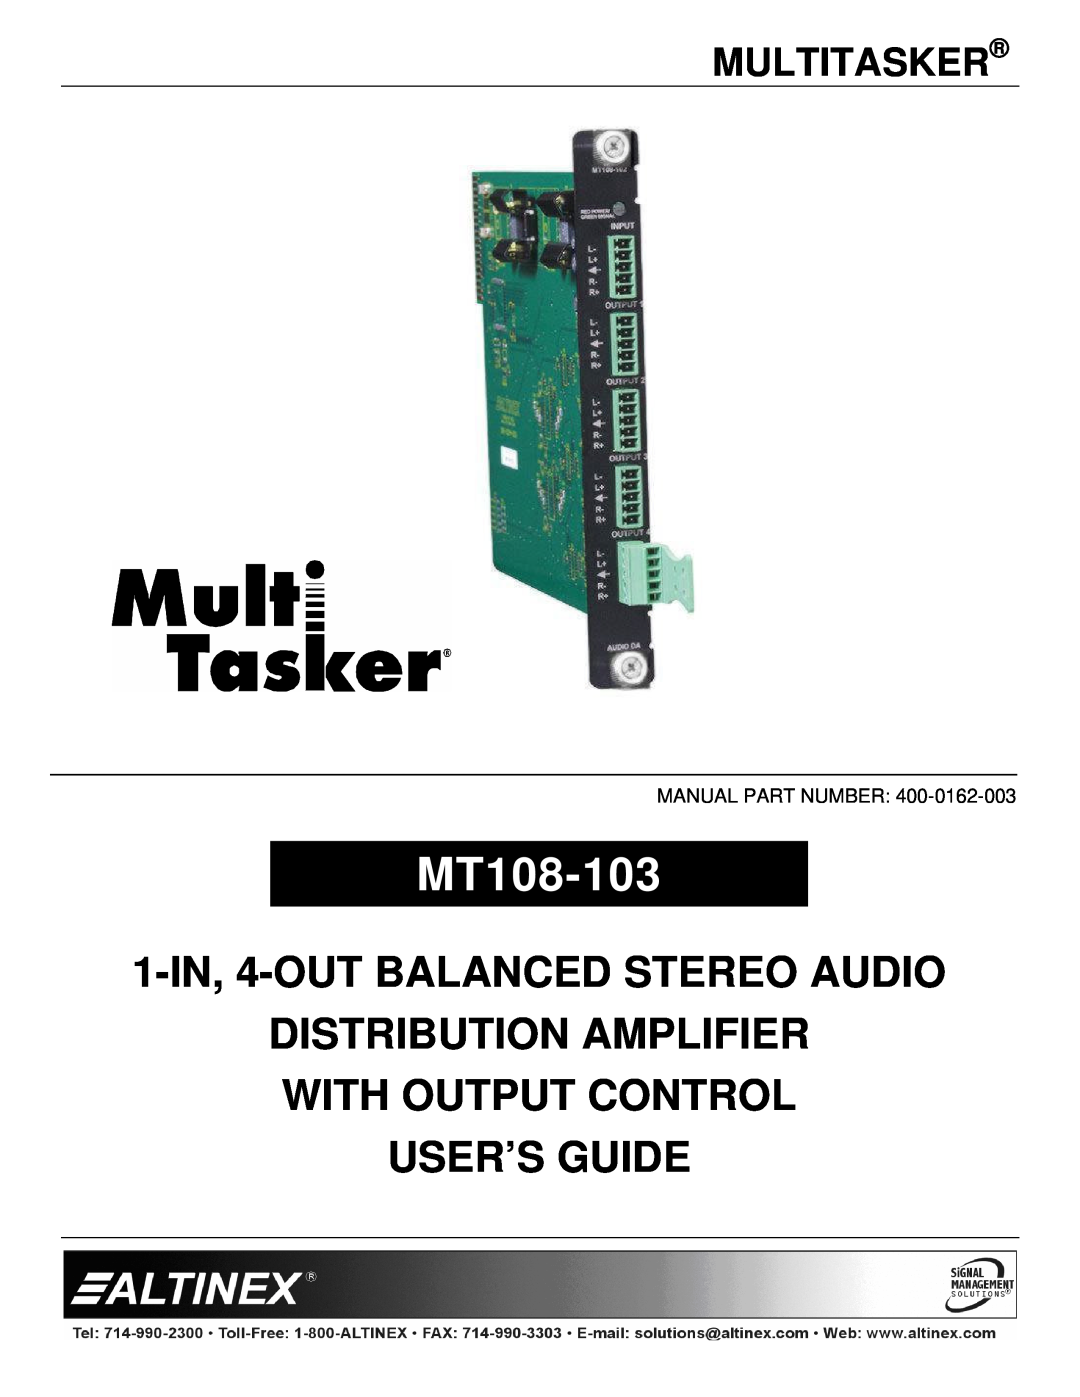 Altinex MT108-103 manual Multitasker, 1-IN, 4-OUTBALANCED STEREO AUDIO, Distribution Amplifier With Output Control 